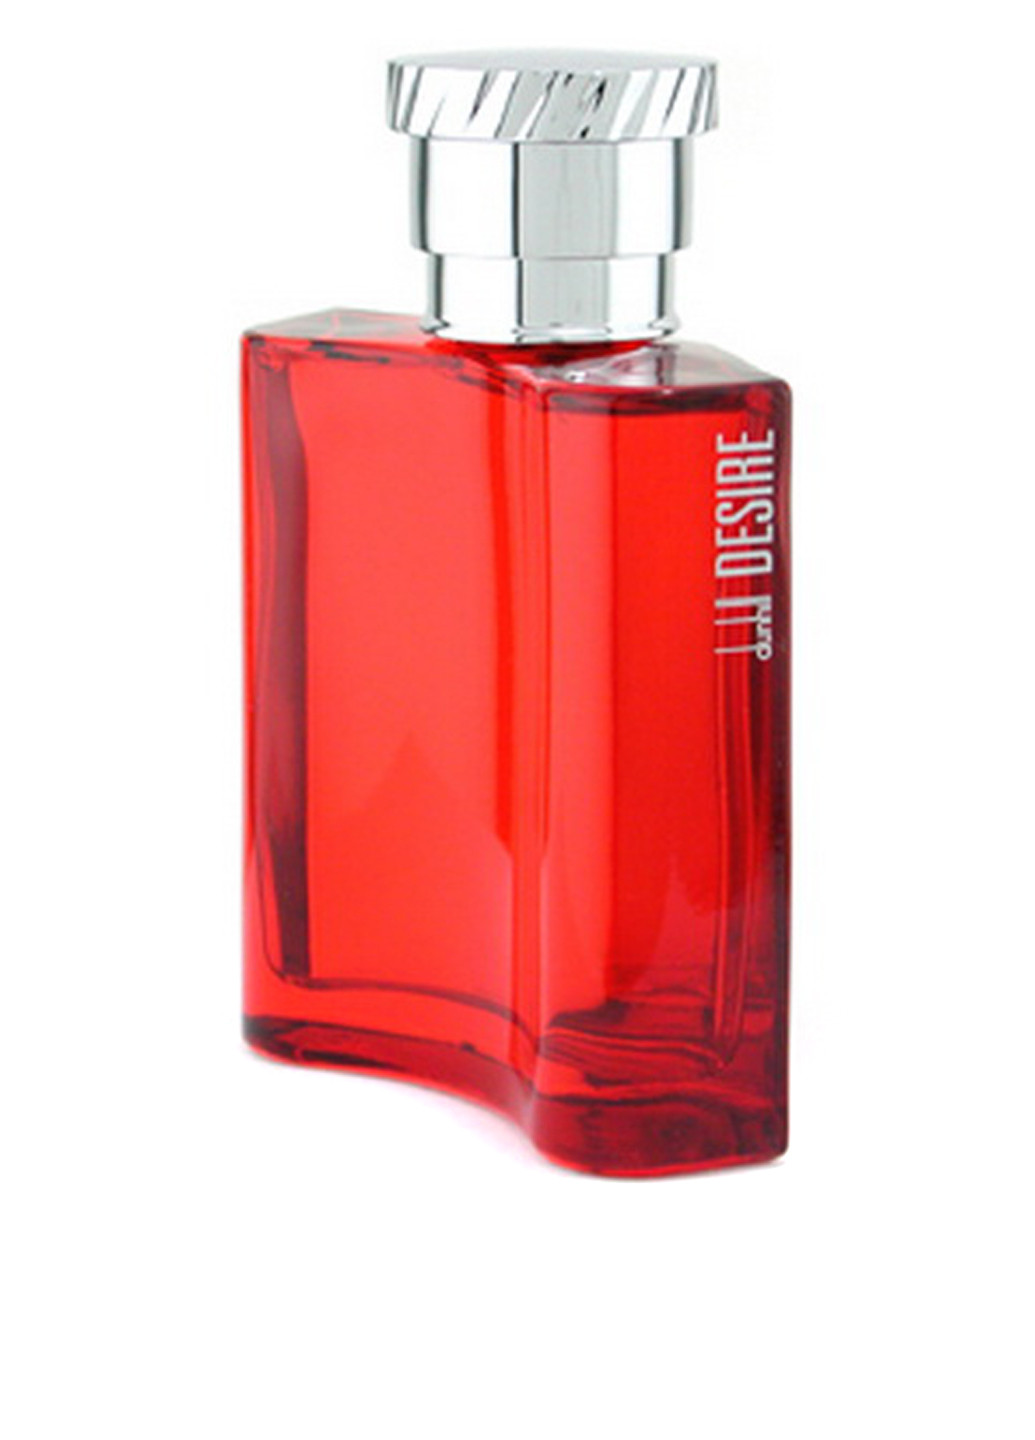 Туалетна вода Desire Pour Homme, 50 мл Alfred Dunhill (64889212)